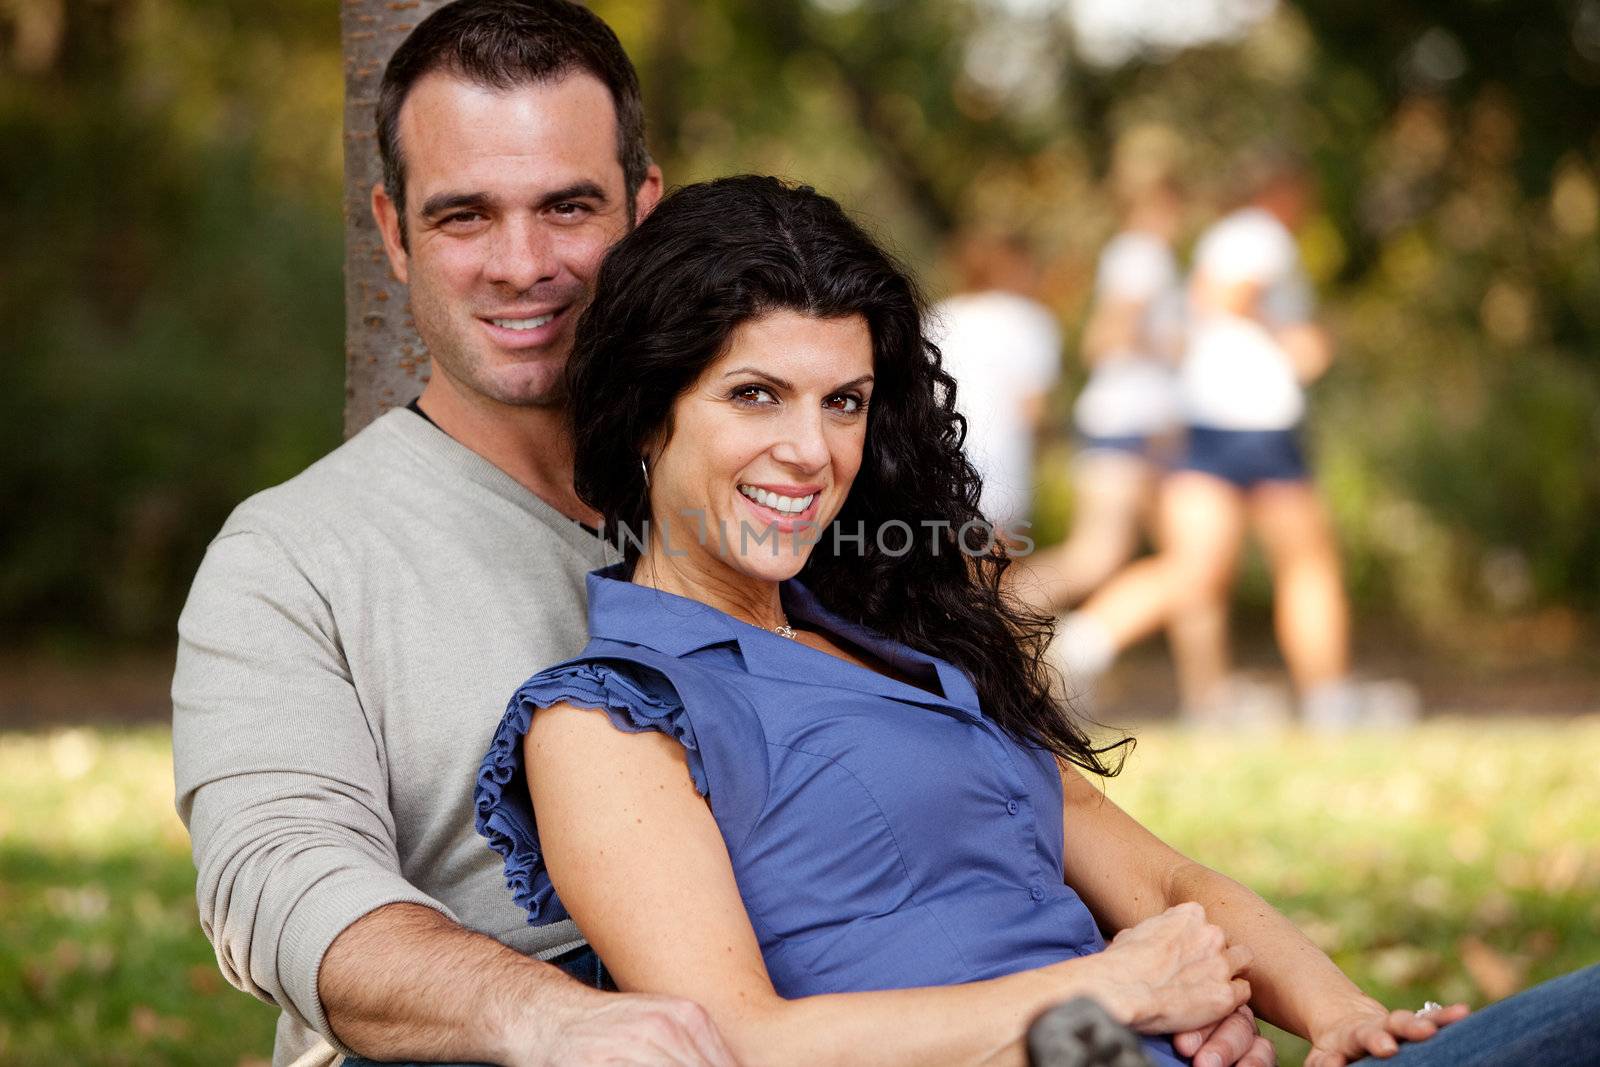 A happy married couple relaxing in the park - focus on the woman